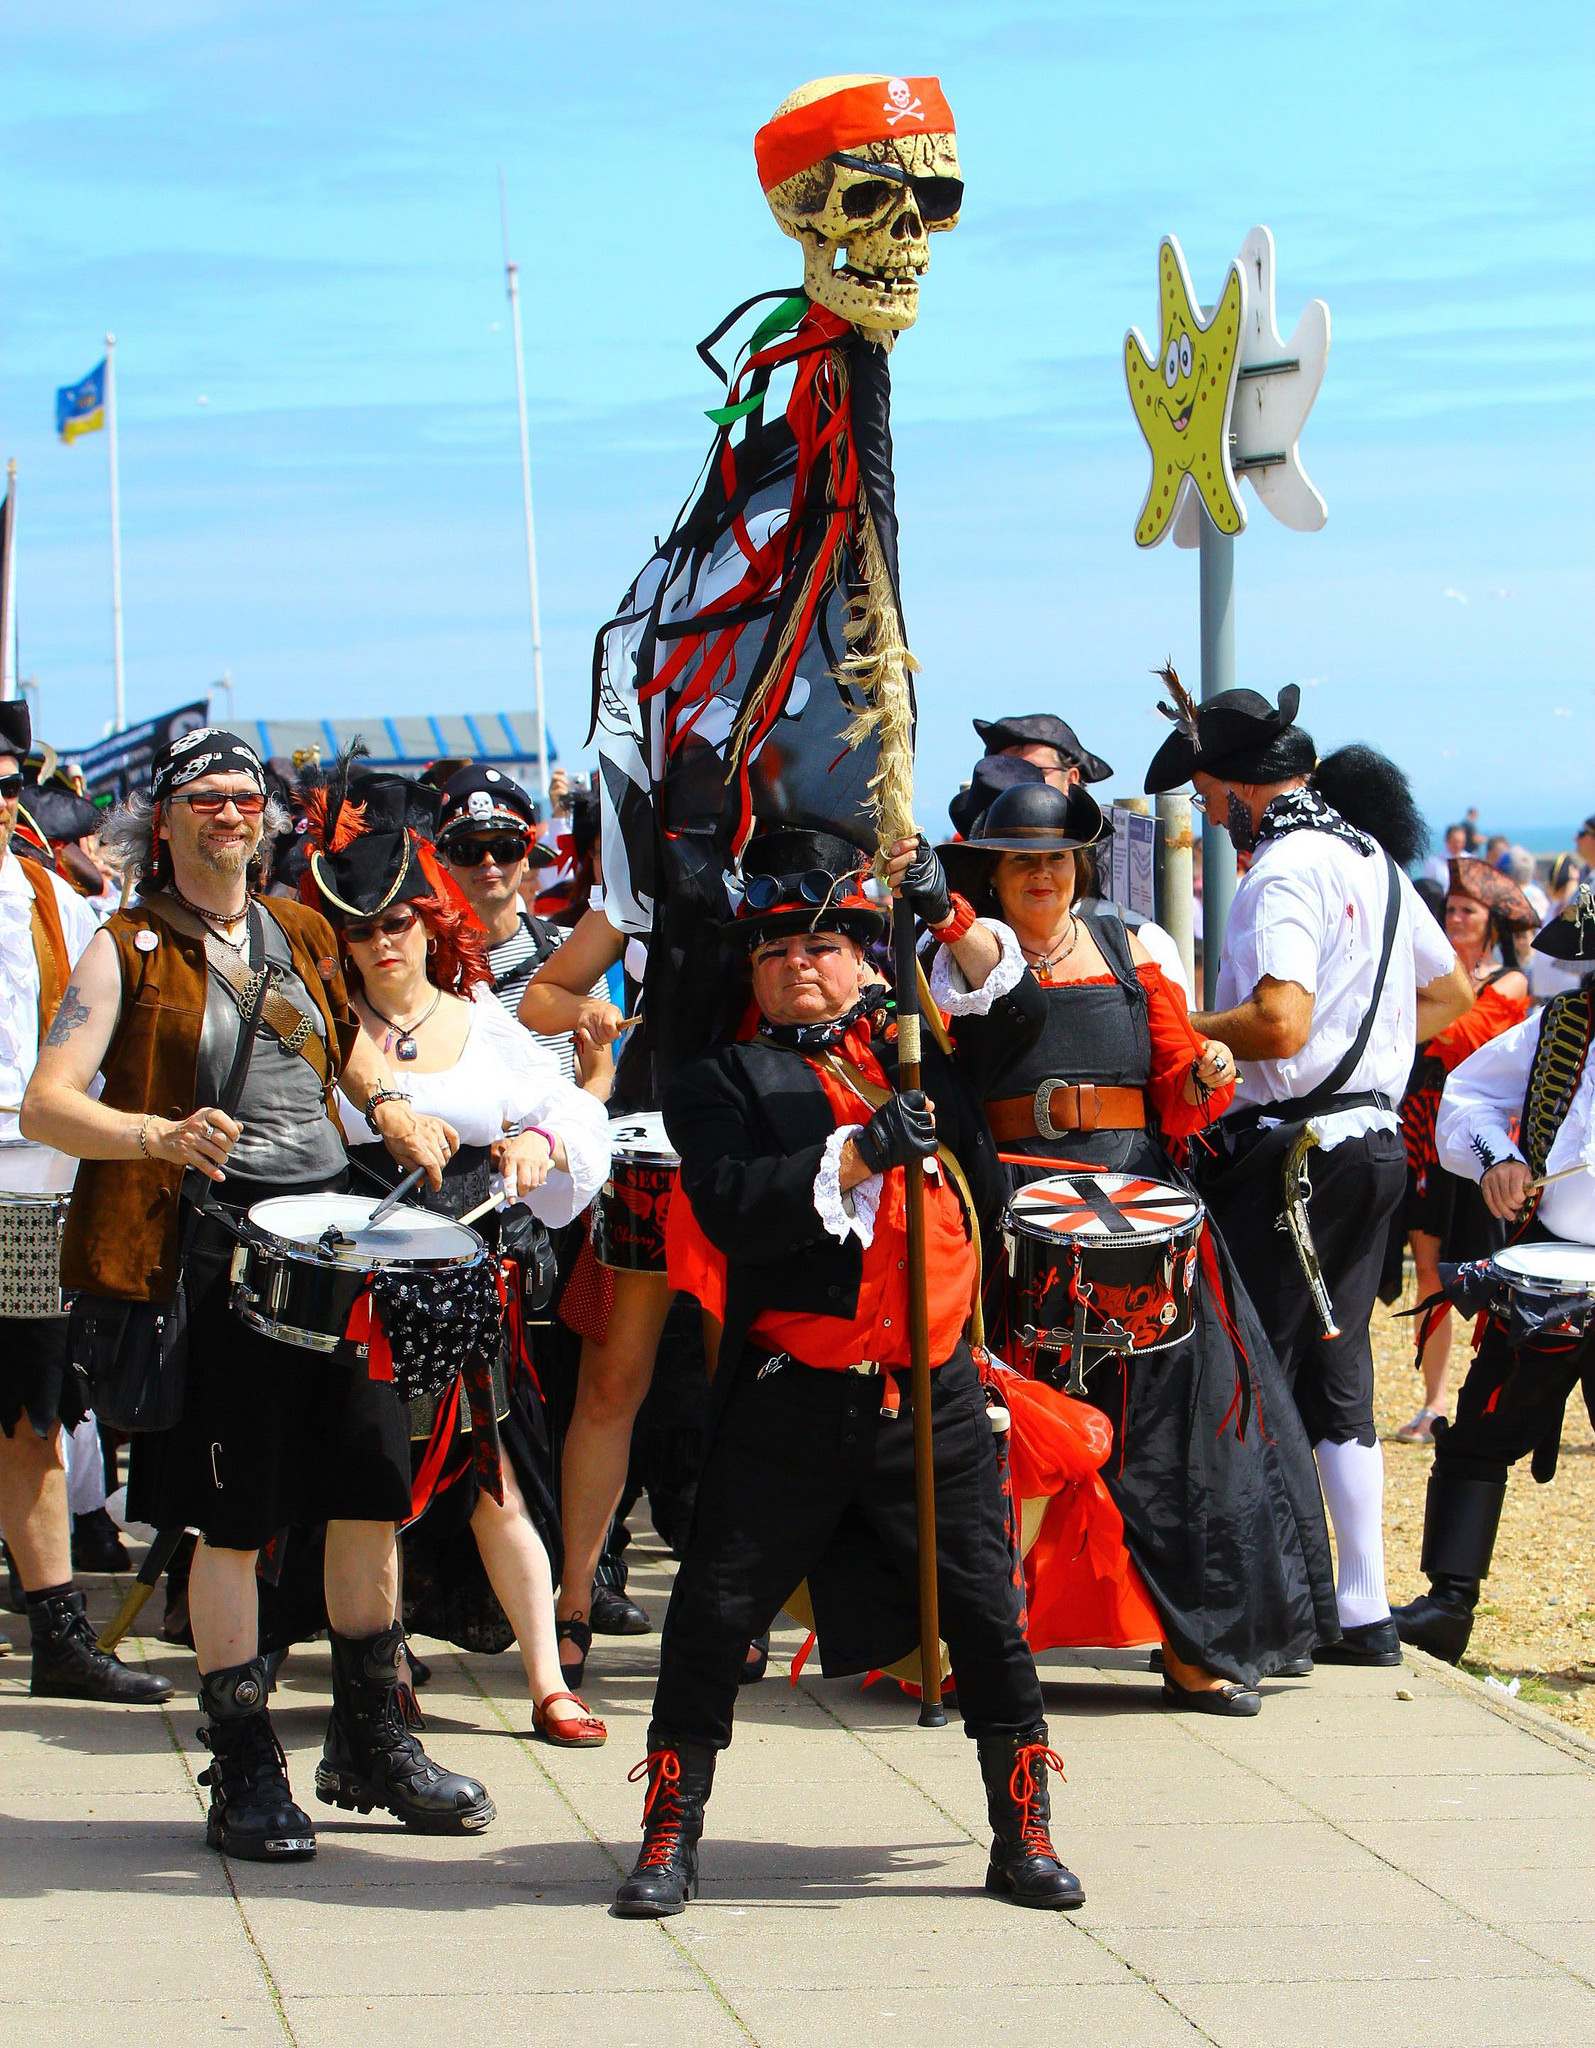 pirate 20166 Hastings Pirate Day 2016